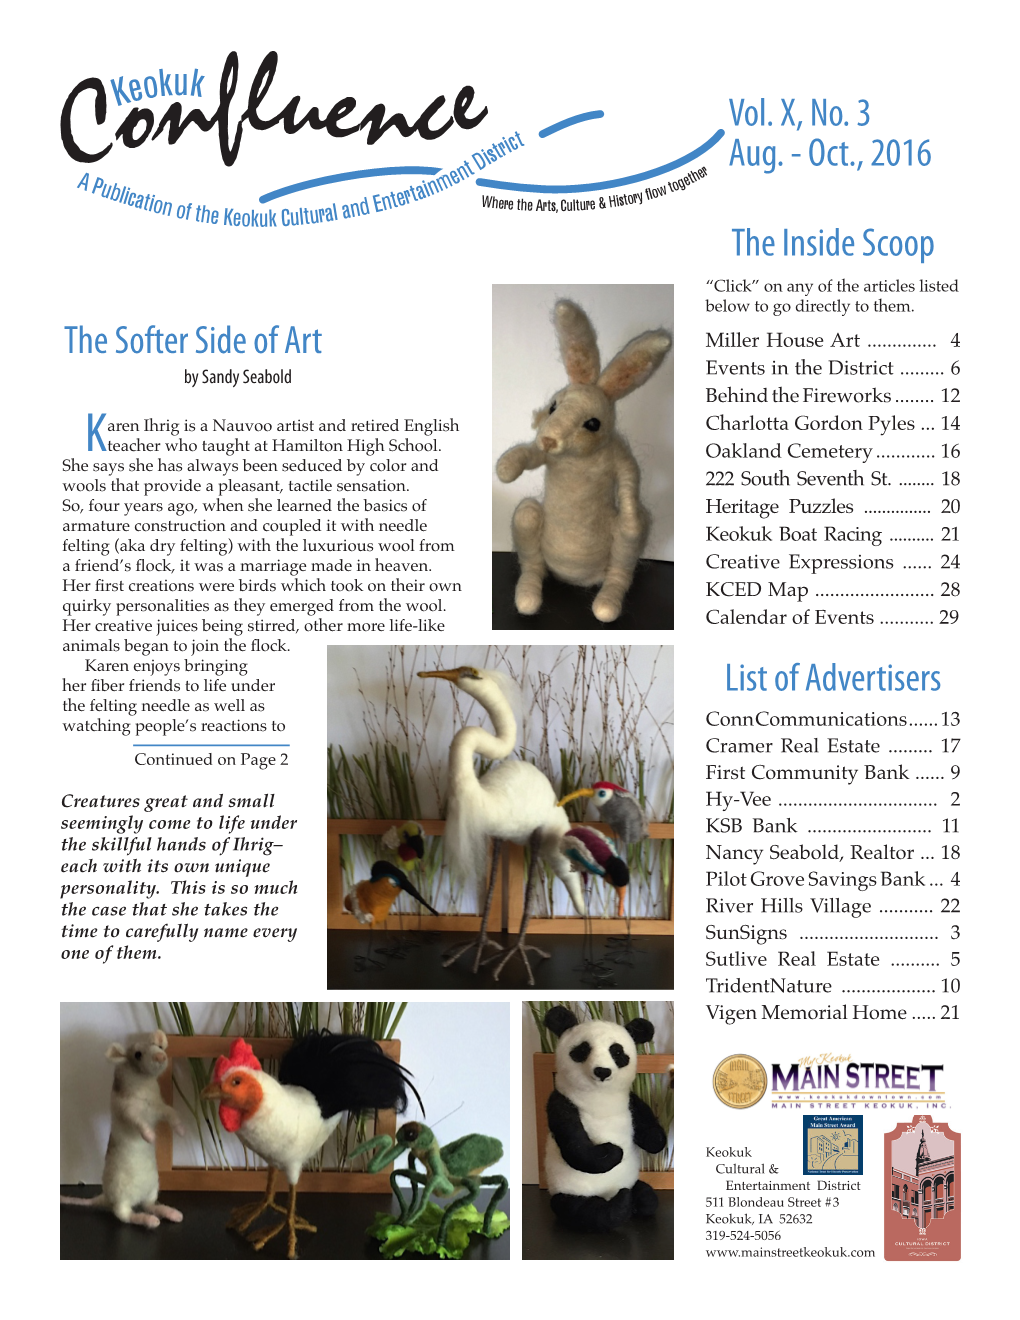 The Softer Side of Art Vol. X, No. 3 Aug